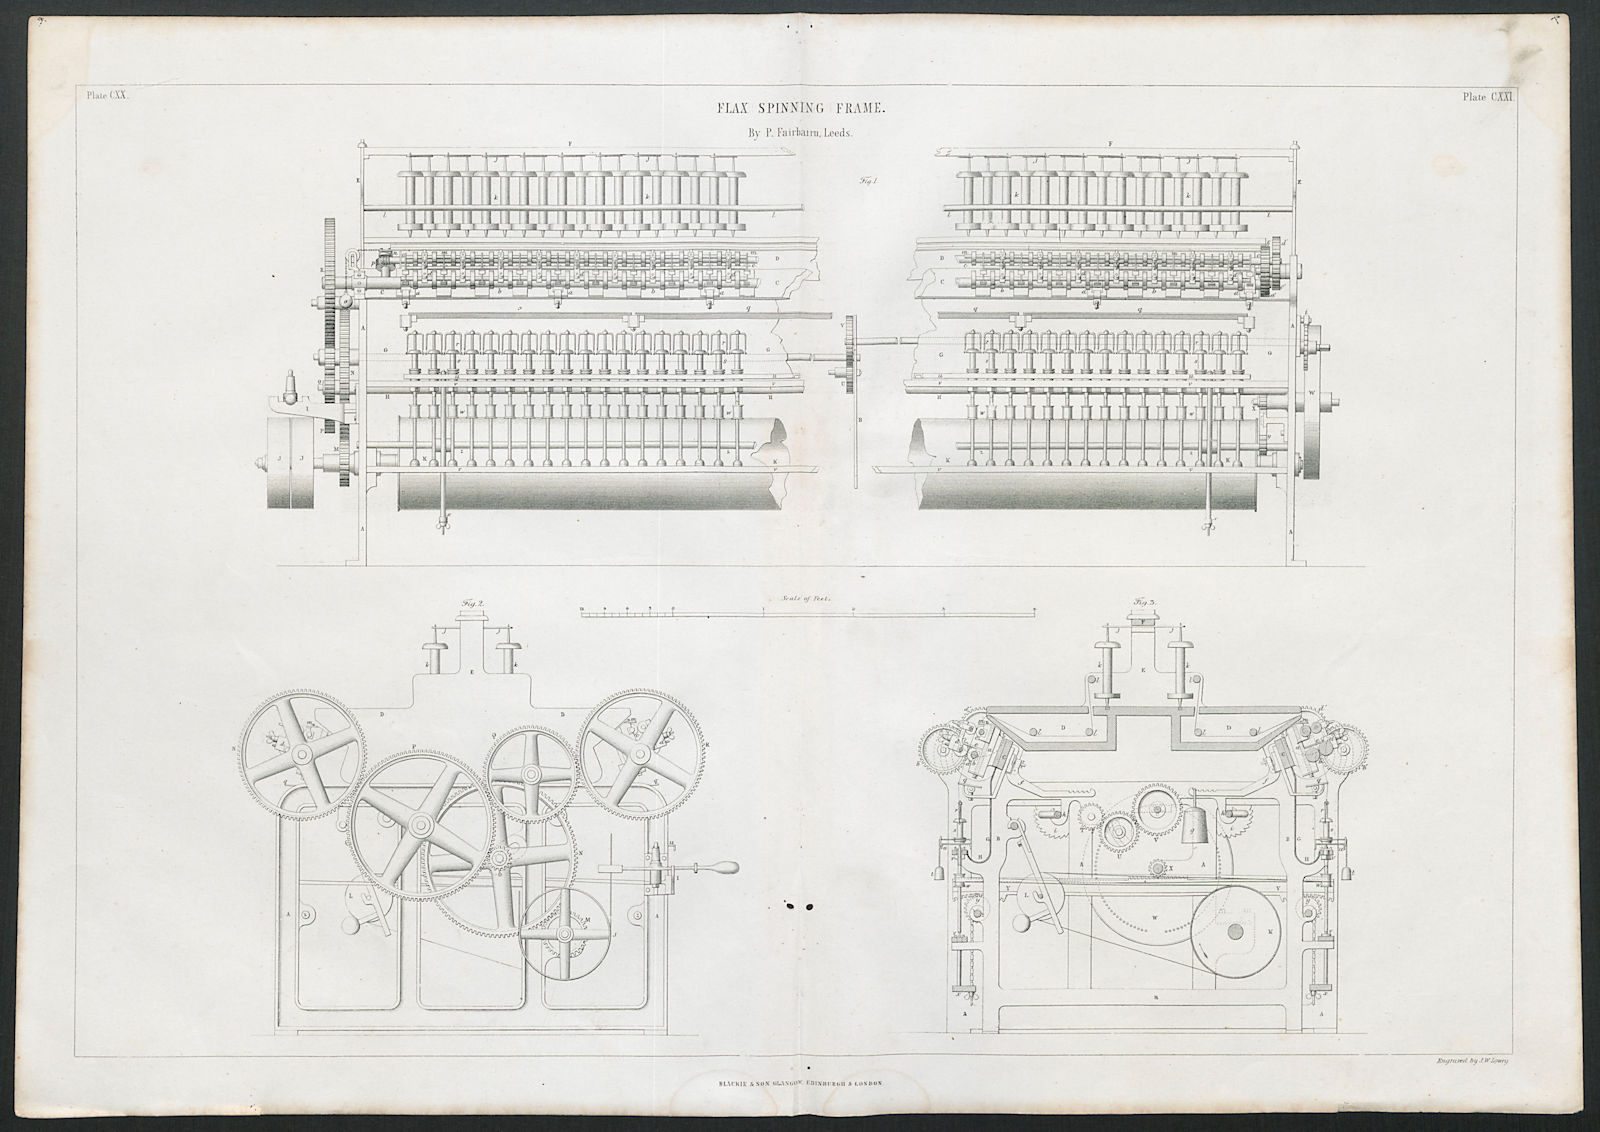 VICTORIAN ENGINEERING DRAWING Flax spinning frame by P. Fairbairn, Leeds 1847